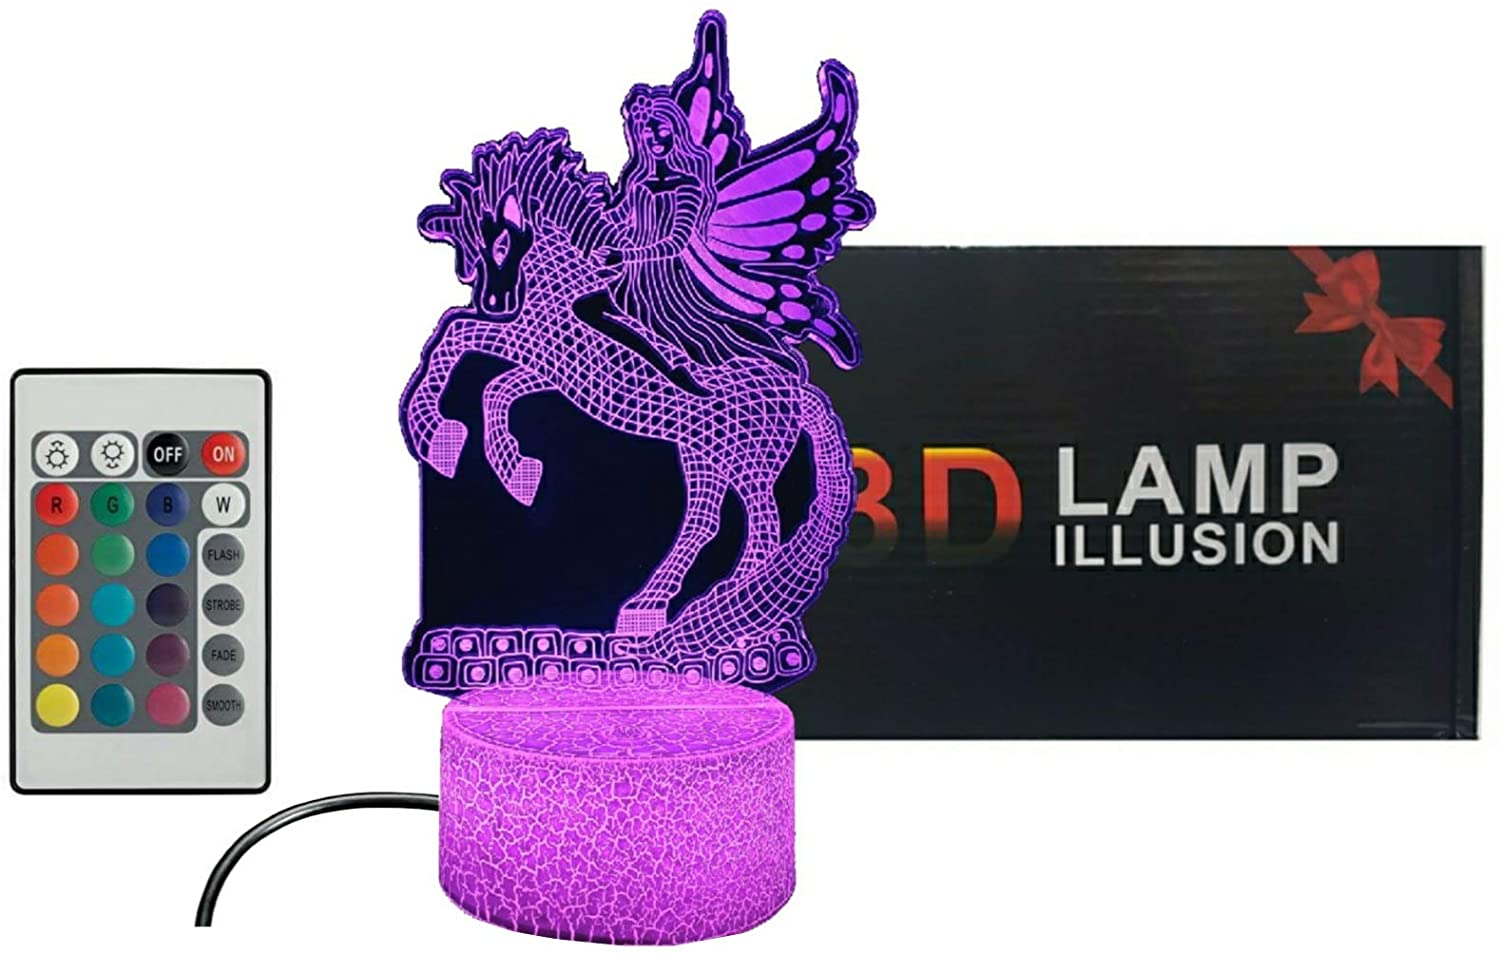 Details about   Universe 3D Led Night Light Remote Control USB Table Lamp for Kids Toy Xmas GIFT 